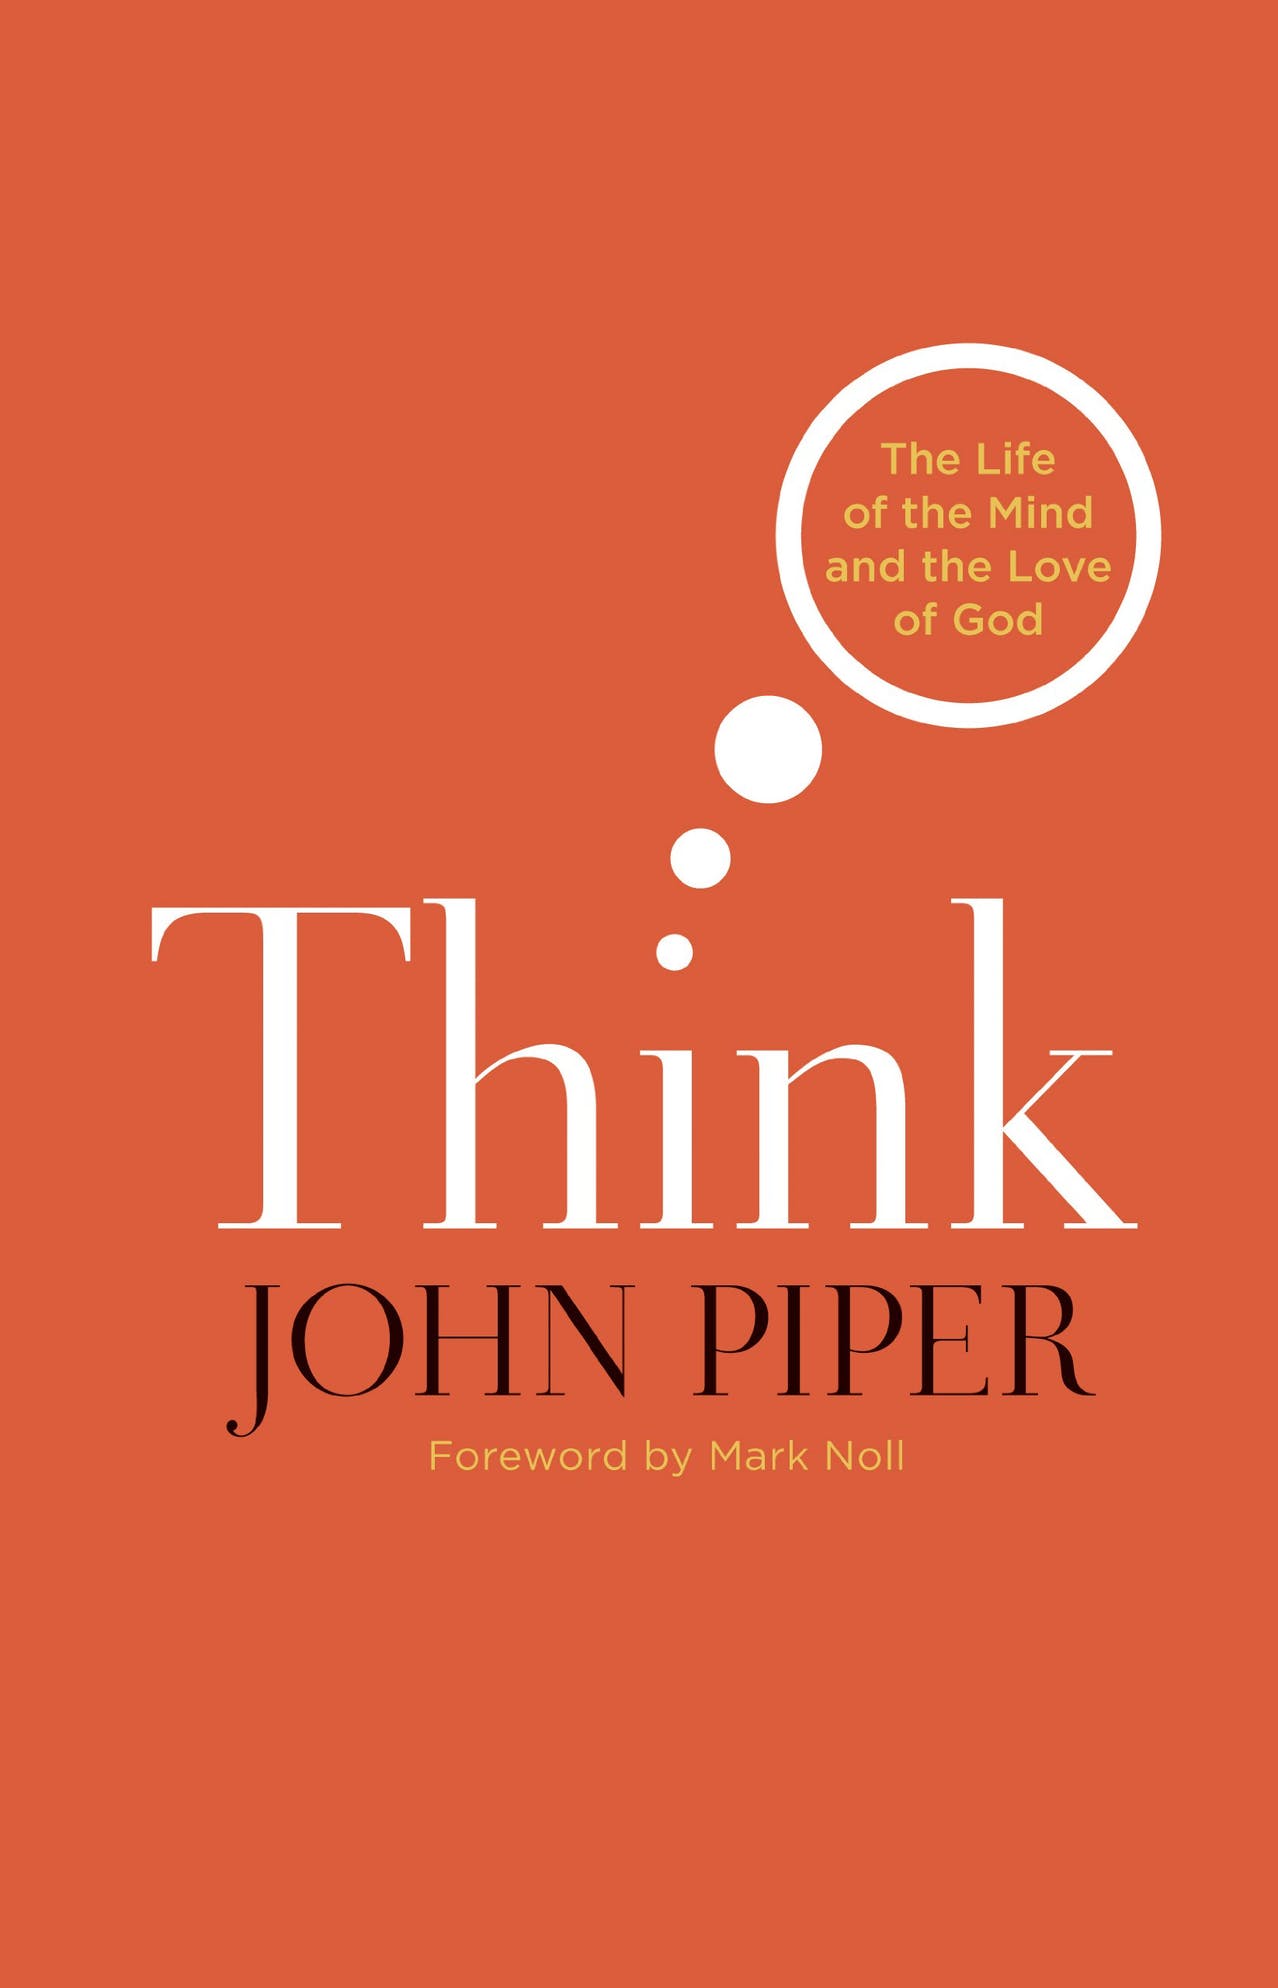 DOWNLOAD PDF: Think! by John Piper 17